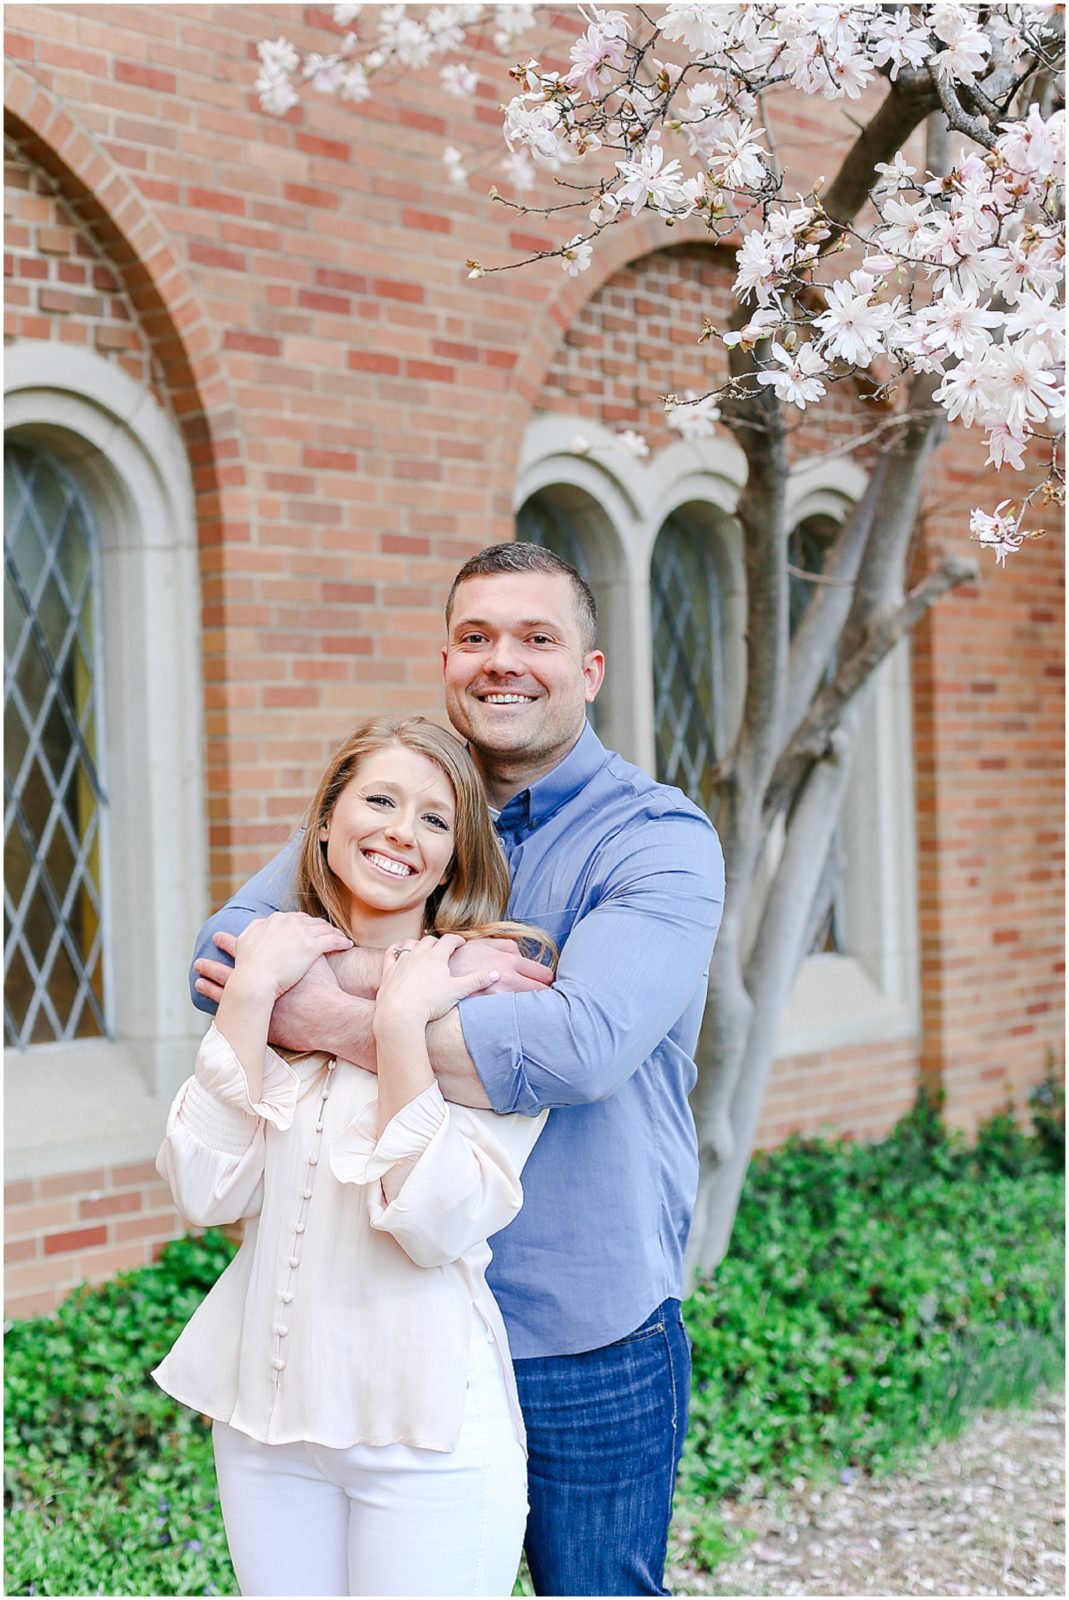 Engagement Photos and Wedding Photos at the Country Club Plaza in Kansas City - Wedding Photographers - Cute engagement photo idaes